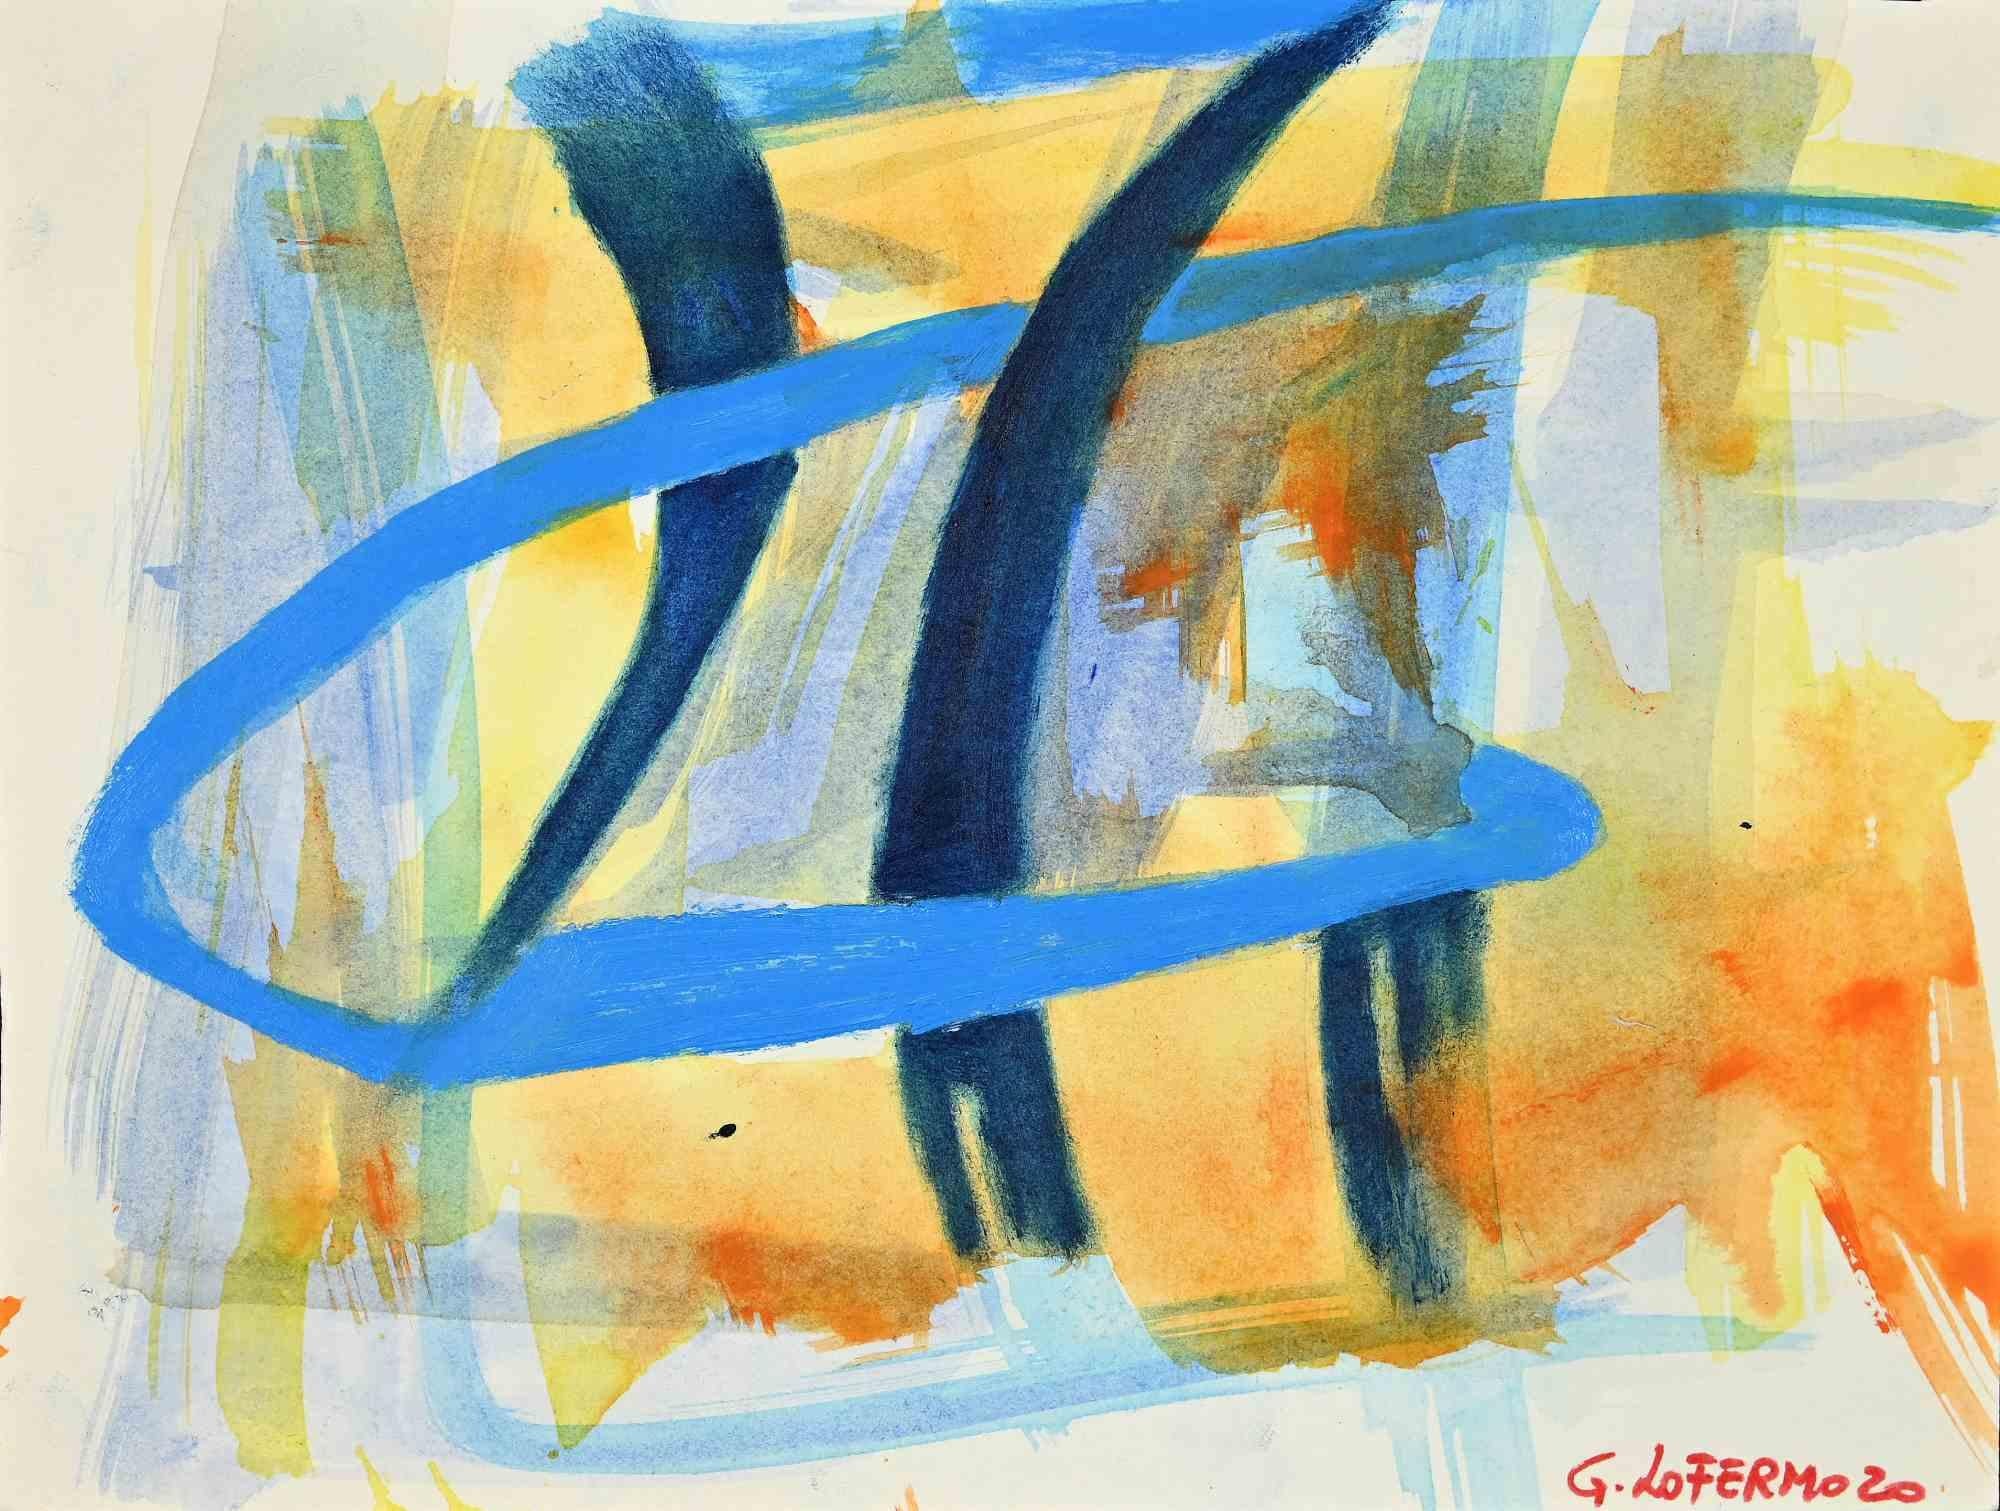 Abstract Composition is an original drawing in Tempera and Watercolor on paper realized by Giorgio Lo Fermo in 2020.

Good Conditions.

The Artwork is Depicted through strong strokes in a well-balanced composition.

 

Giorgio Lo Fermo  is an